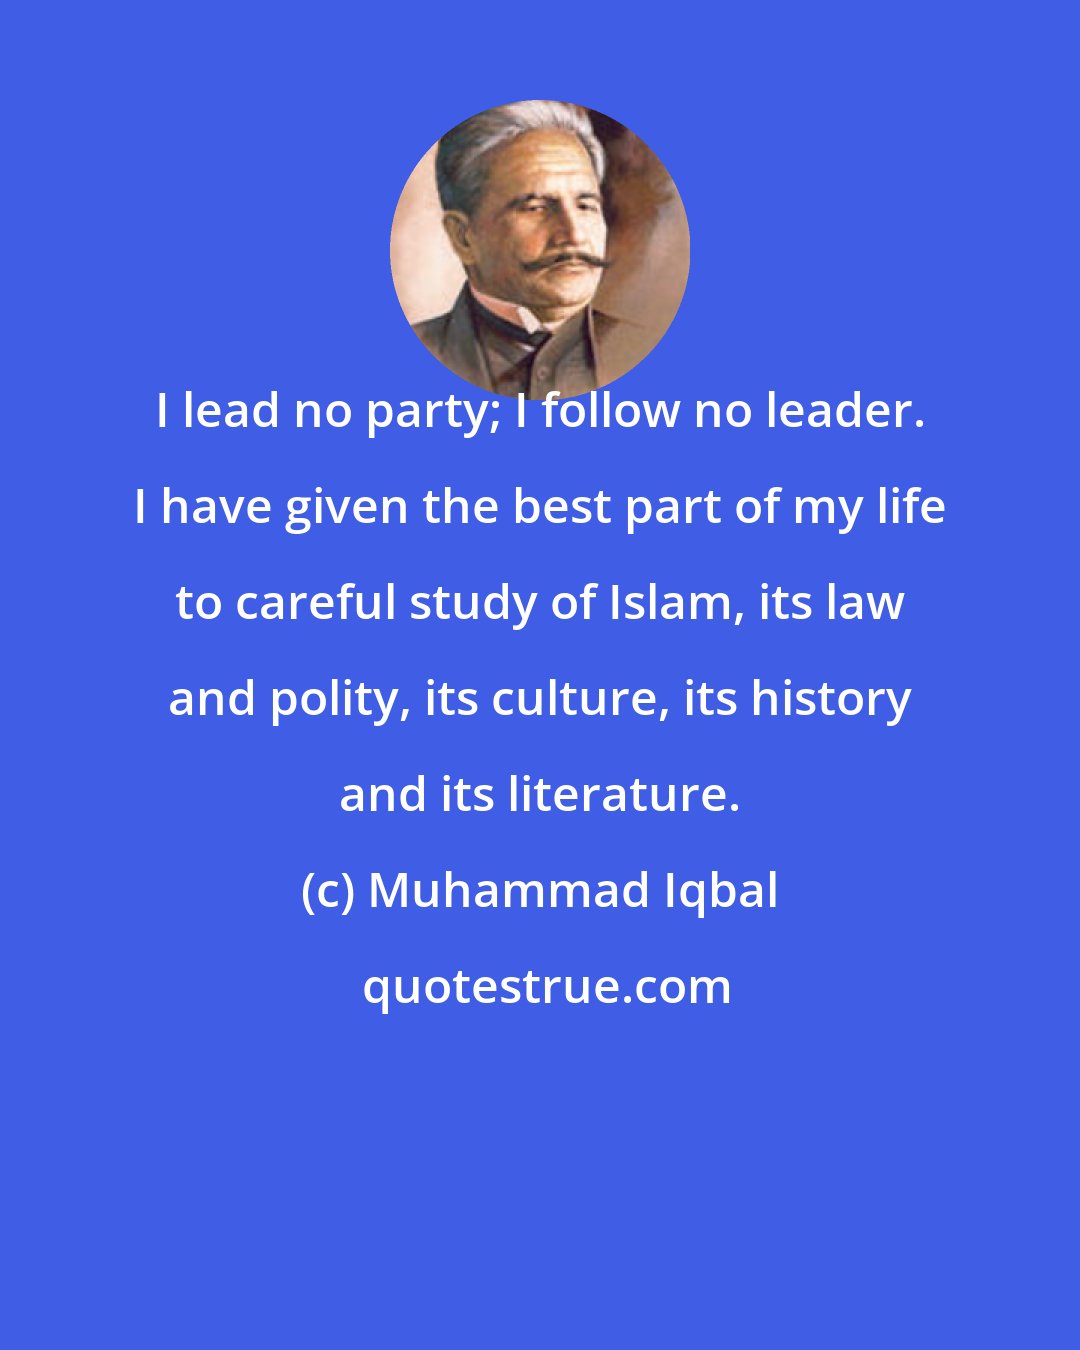 Muhammad Iqbal: I lead no party; I follow no leader. I have given the best part of my life to careful study of Islam, its law and polity, its culture, its history and its literature.